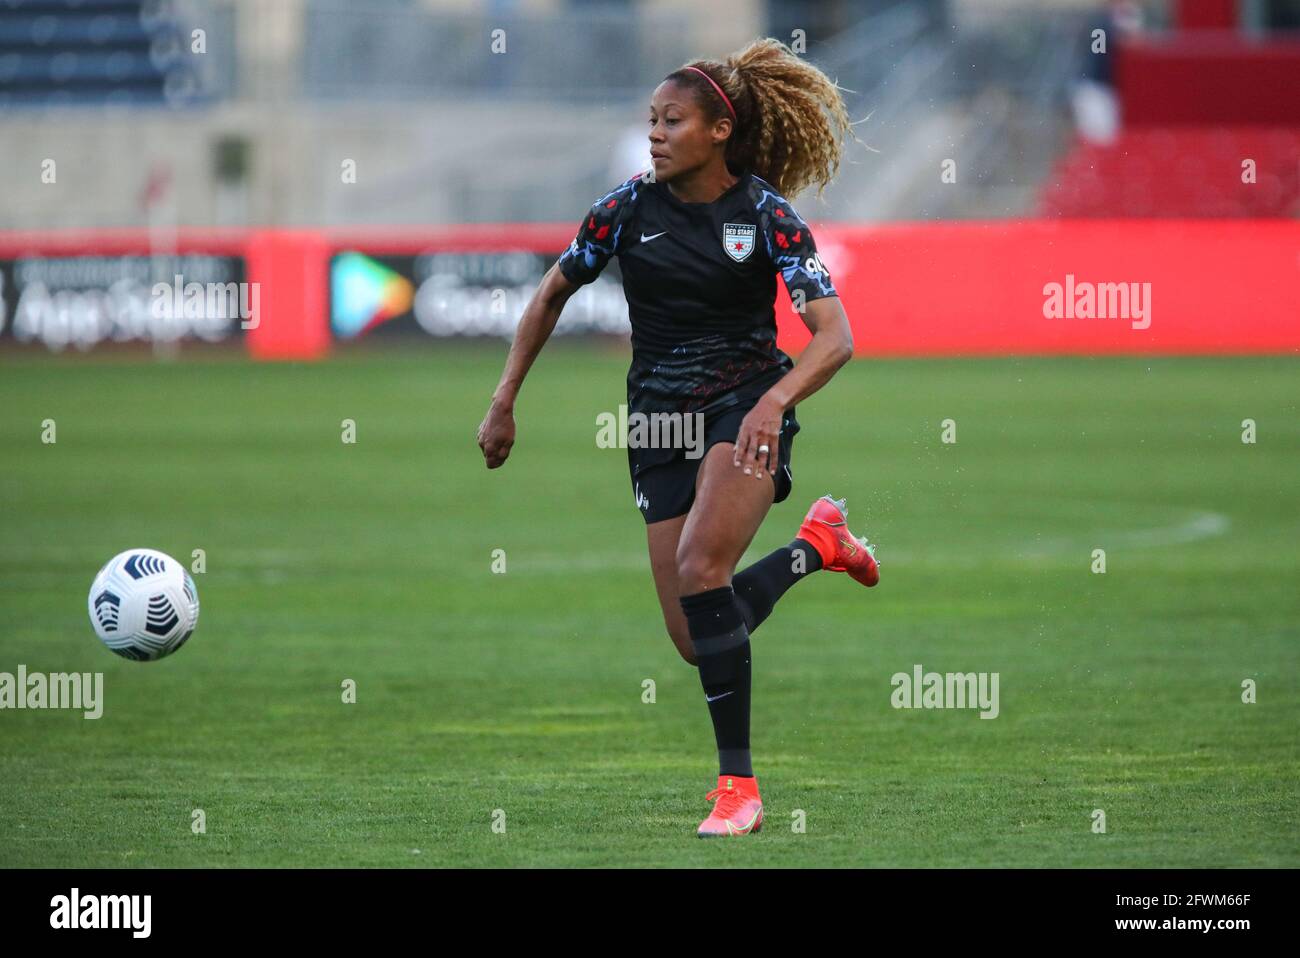 Chicago Red Stars defender Casey Krueger (6) dribbles the ball during a NWSL match at SeatGeek Stadium, Saturday, May 22, 2021, in Bridgeview, Illinoi Stock Photo